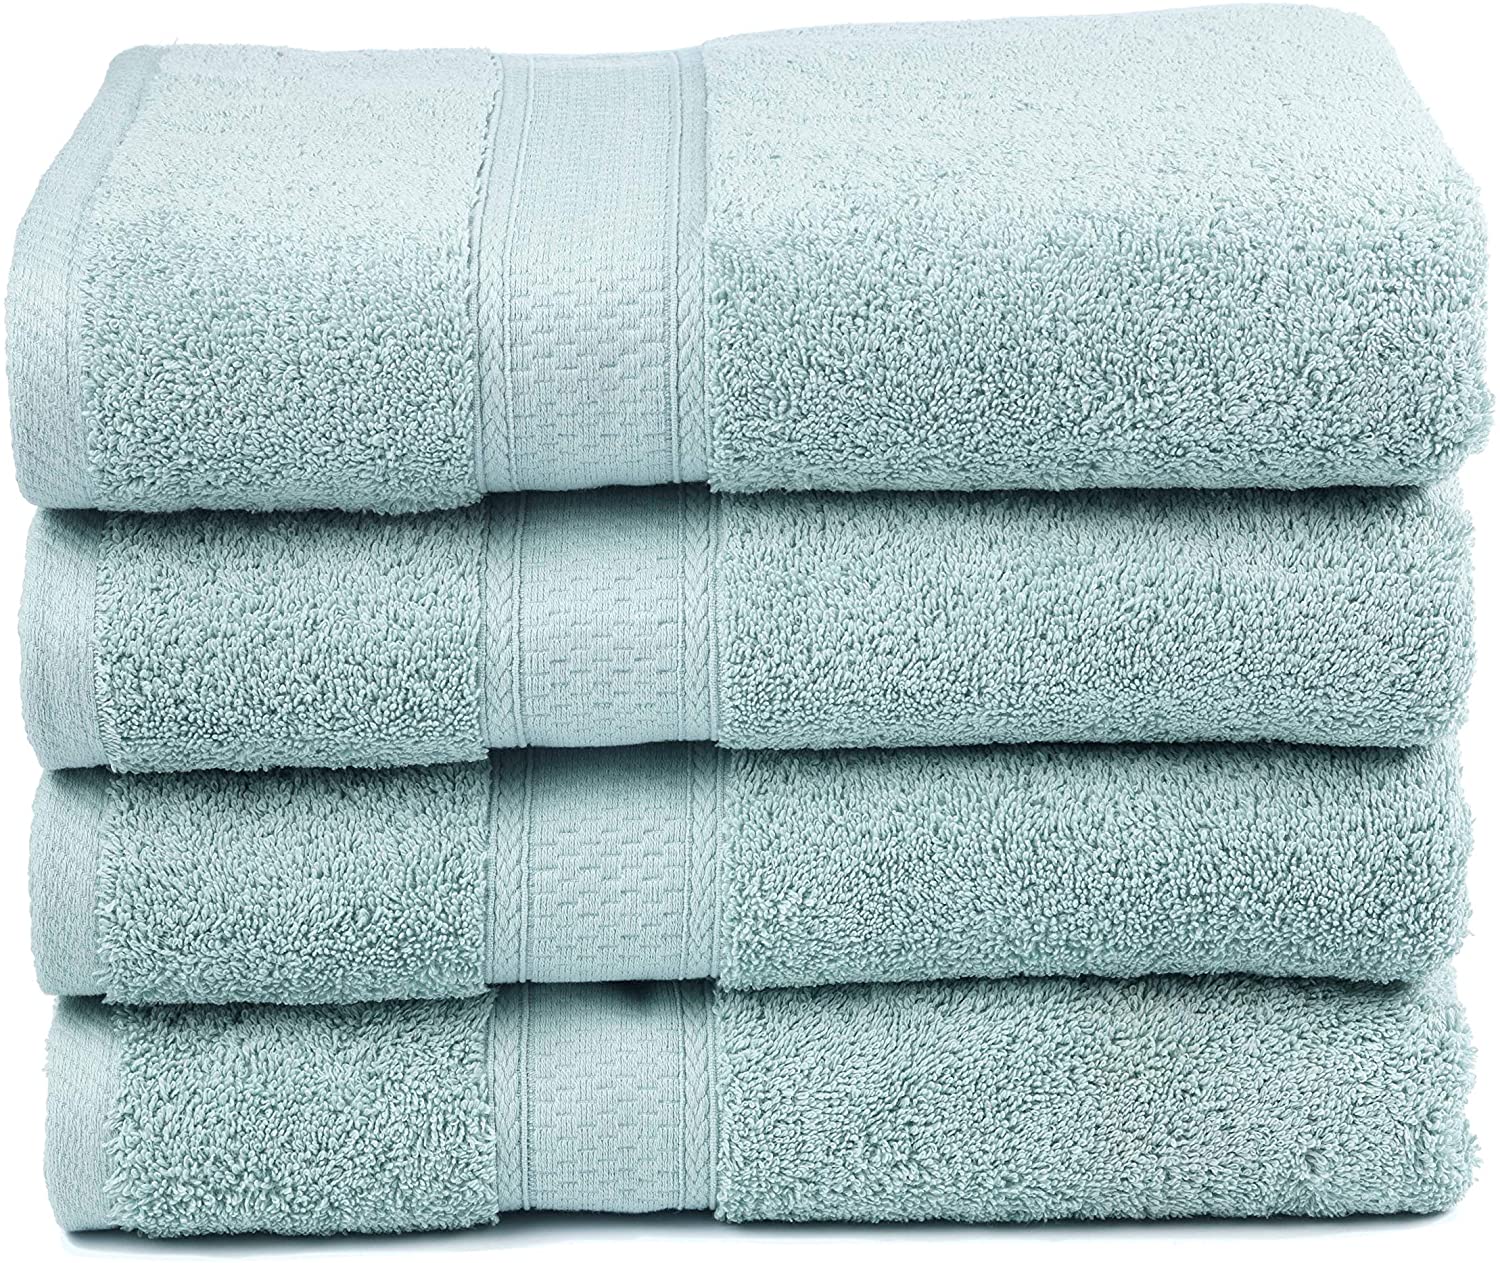 Premium Cotton Bath Towels R301 Natural Ultra Absorbent and Eco-Friendly 